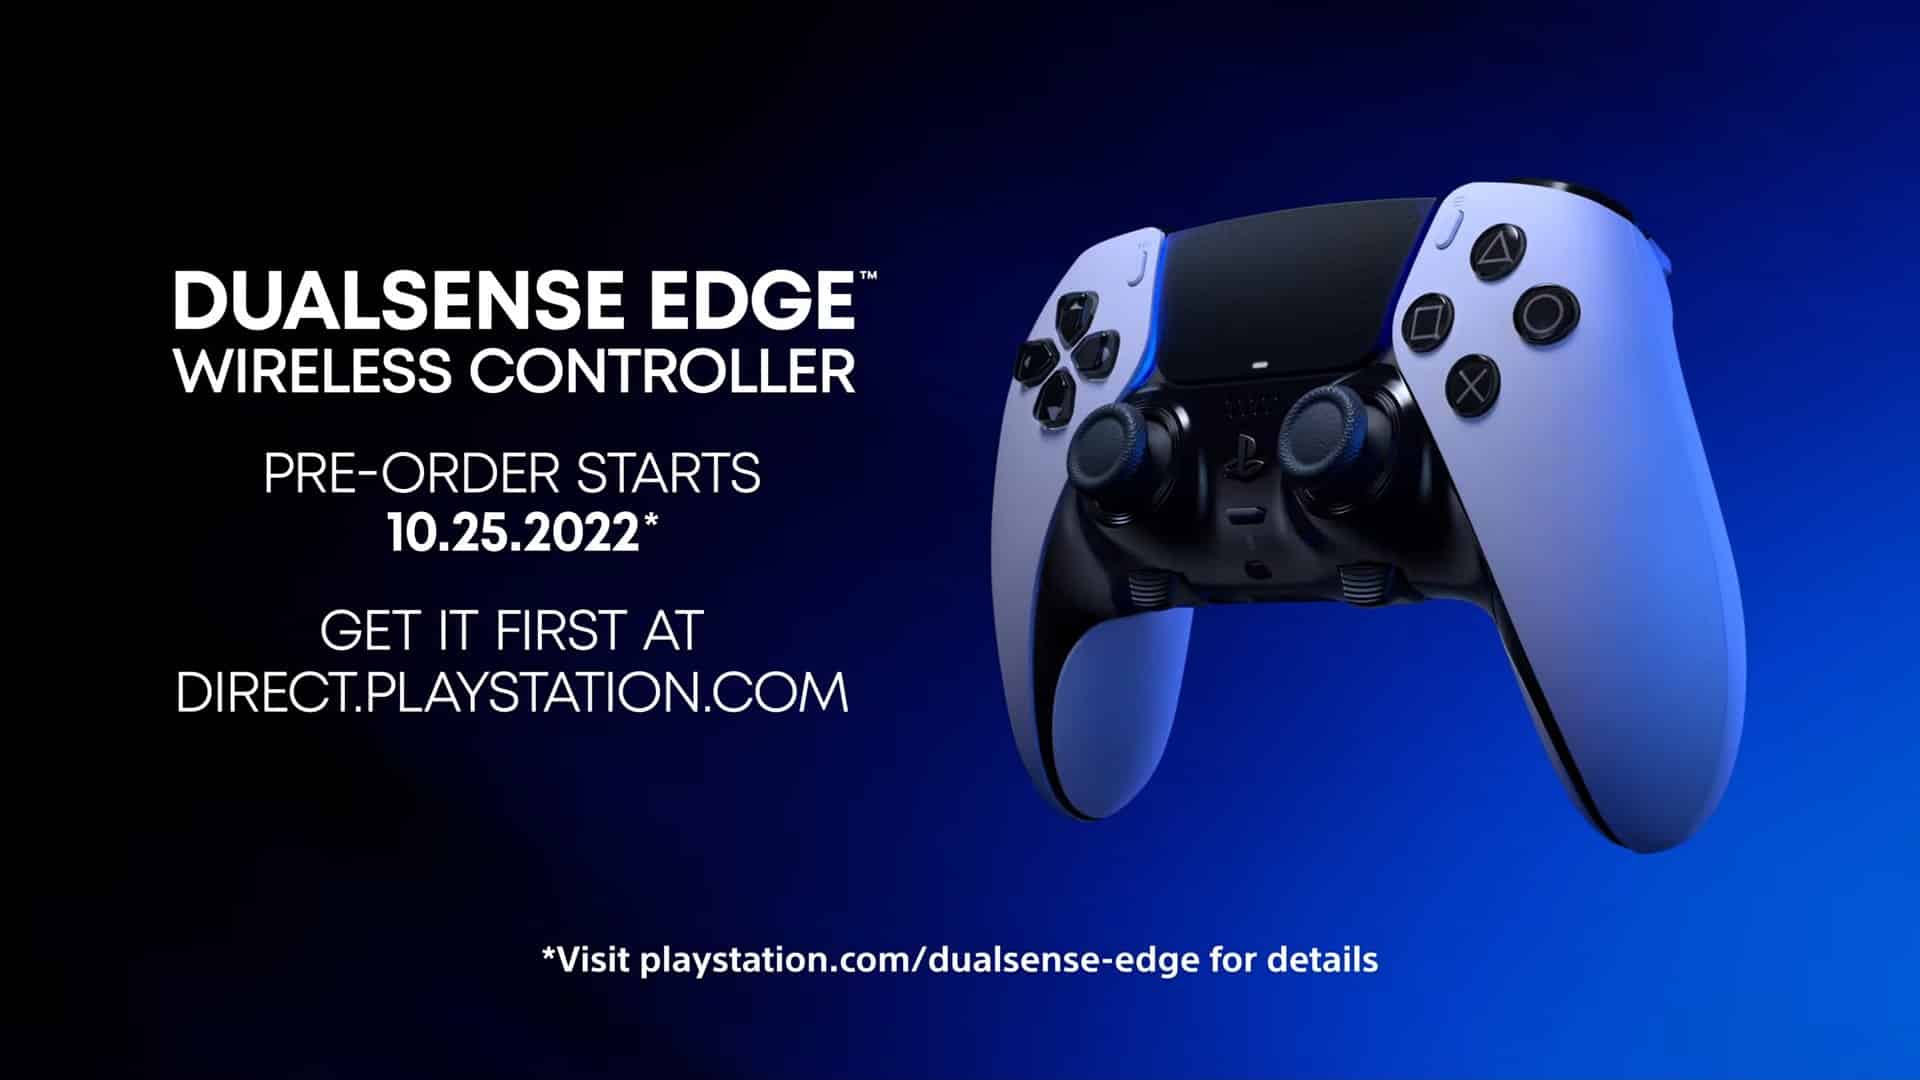 PS5 DualSense Edge - The Best Pro Controller Is Here?